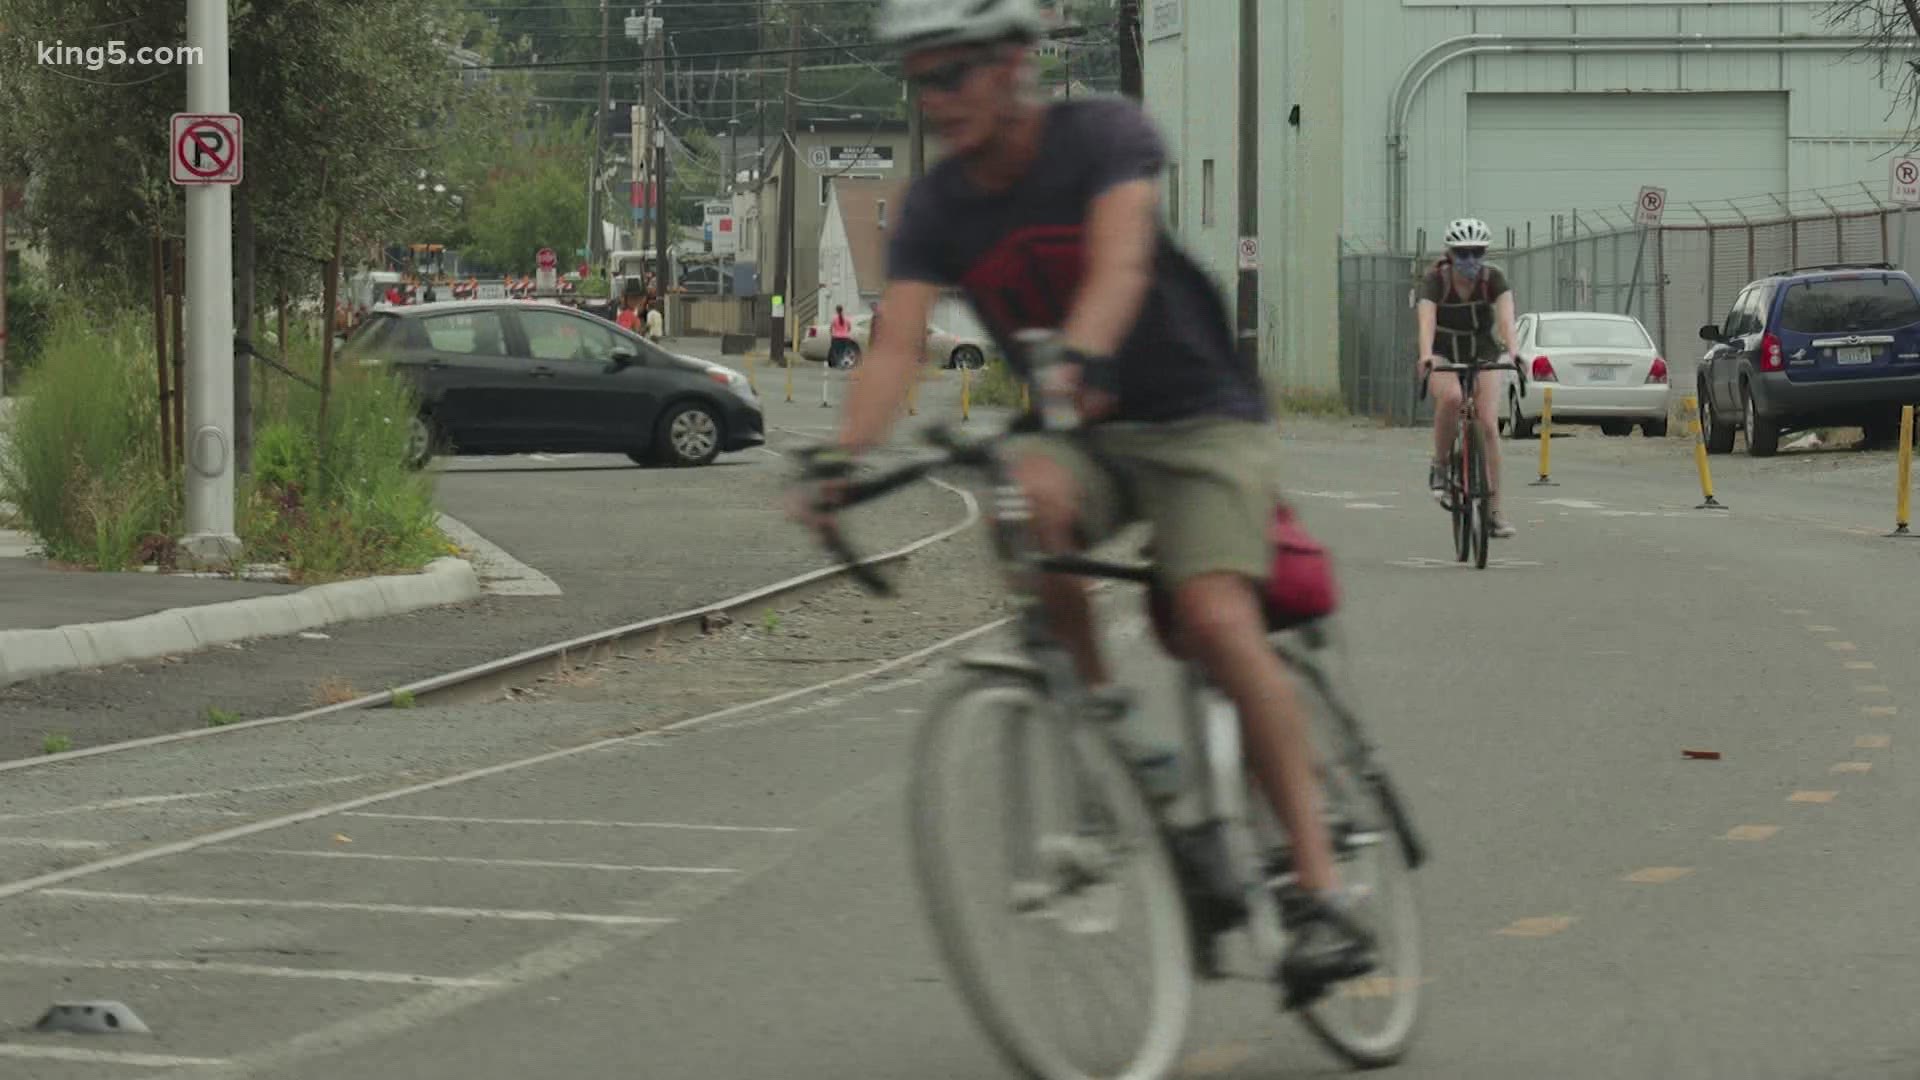 City of Seattle plans to appeal after a court said it lacks authority to move a train track in Ballard to link the trail. Cyclists say it is the safest option.